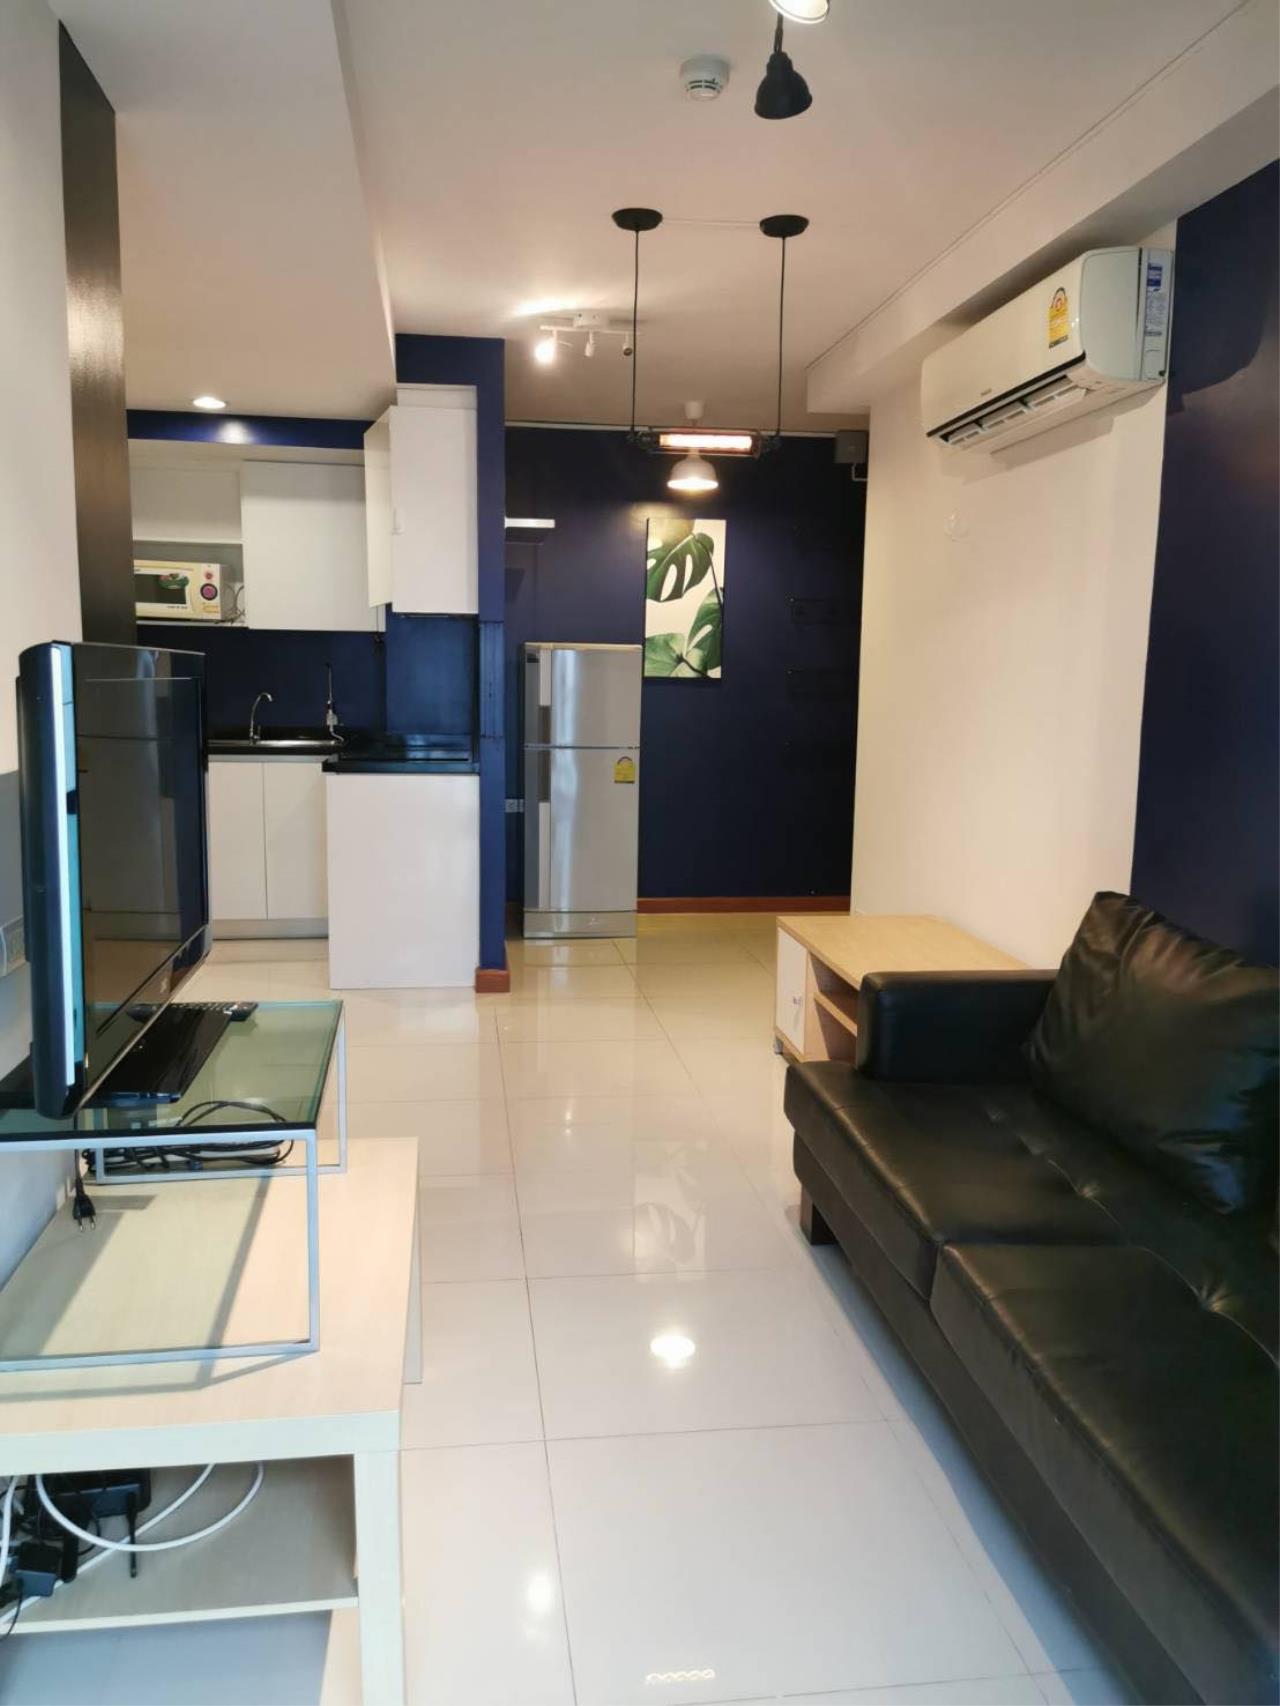 Kwankhao Kathinthong Agency's CONDO FOR SALE - Le Cote Thonglor 8, 1 Bedroom, 5.6 MB. 2